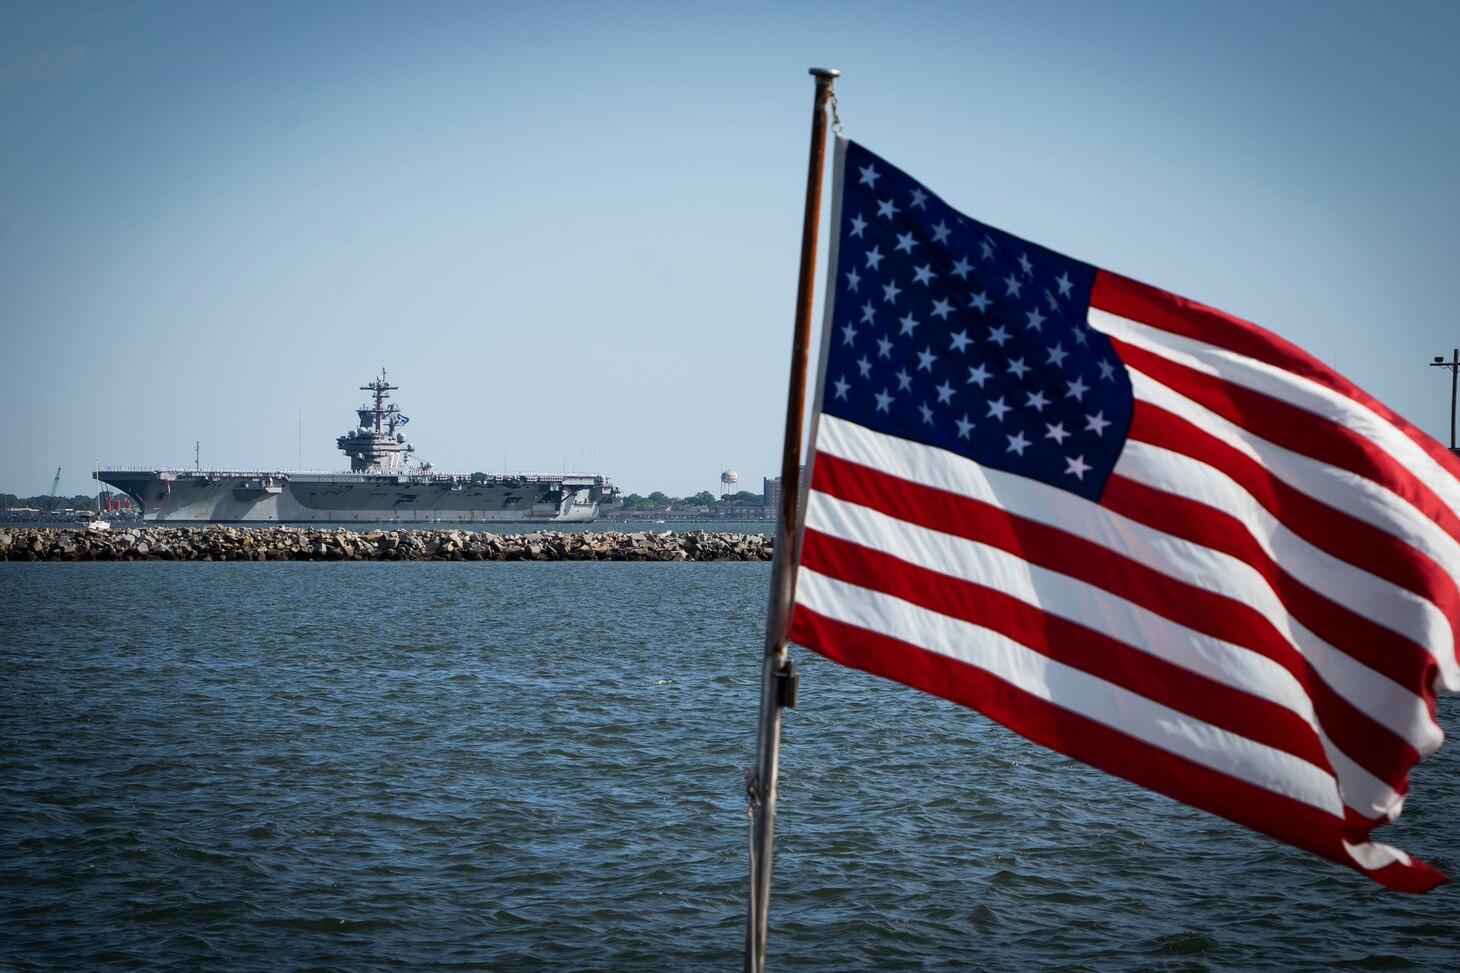 NORFOLK, Va. (April 23, 2023)  The Nimitz-class aircraft carrier USS George H.W. Bush (CVN 77), along with the staff of carrier Strike Group (CSG) 10, returns to Naval Station Norfolk following an eight-month deployment, April 23, 2023. The George H.W. Bush CSG was deployed to the U.S. Naval Forces Europe area of operations, employed by U.S. Sixth Fleet to defend U.S., allied and partner interests. (U.S. Navy photo by Mass Communication Specialist 2nd Class Anderson W. Branch)